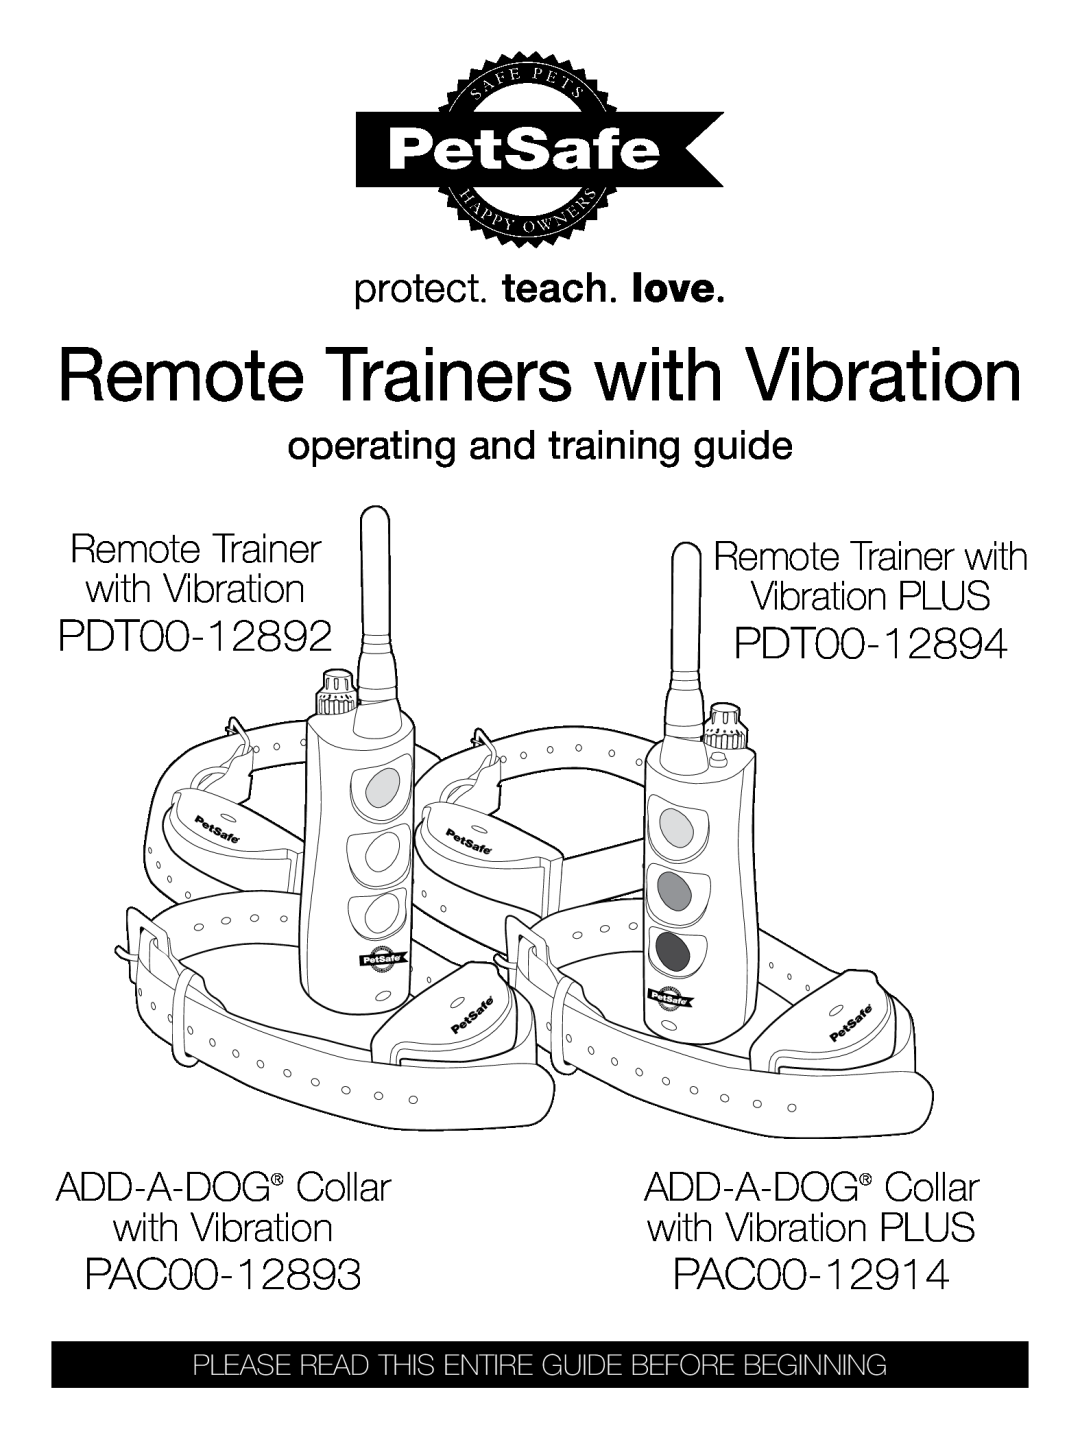 Petsafe manual Remote Trainers with Vibration, PDT00-12892PDT00-12894, PAC00-12893, PAC00-12914, ADD-A-DOG Collar 